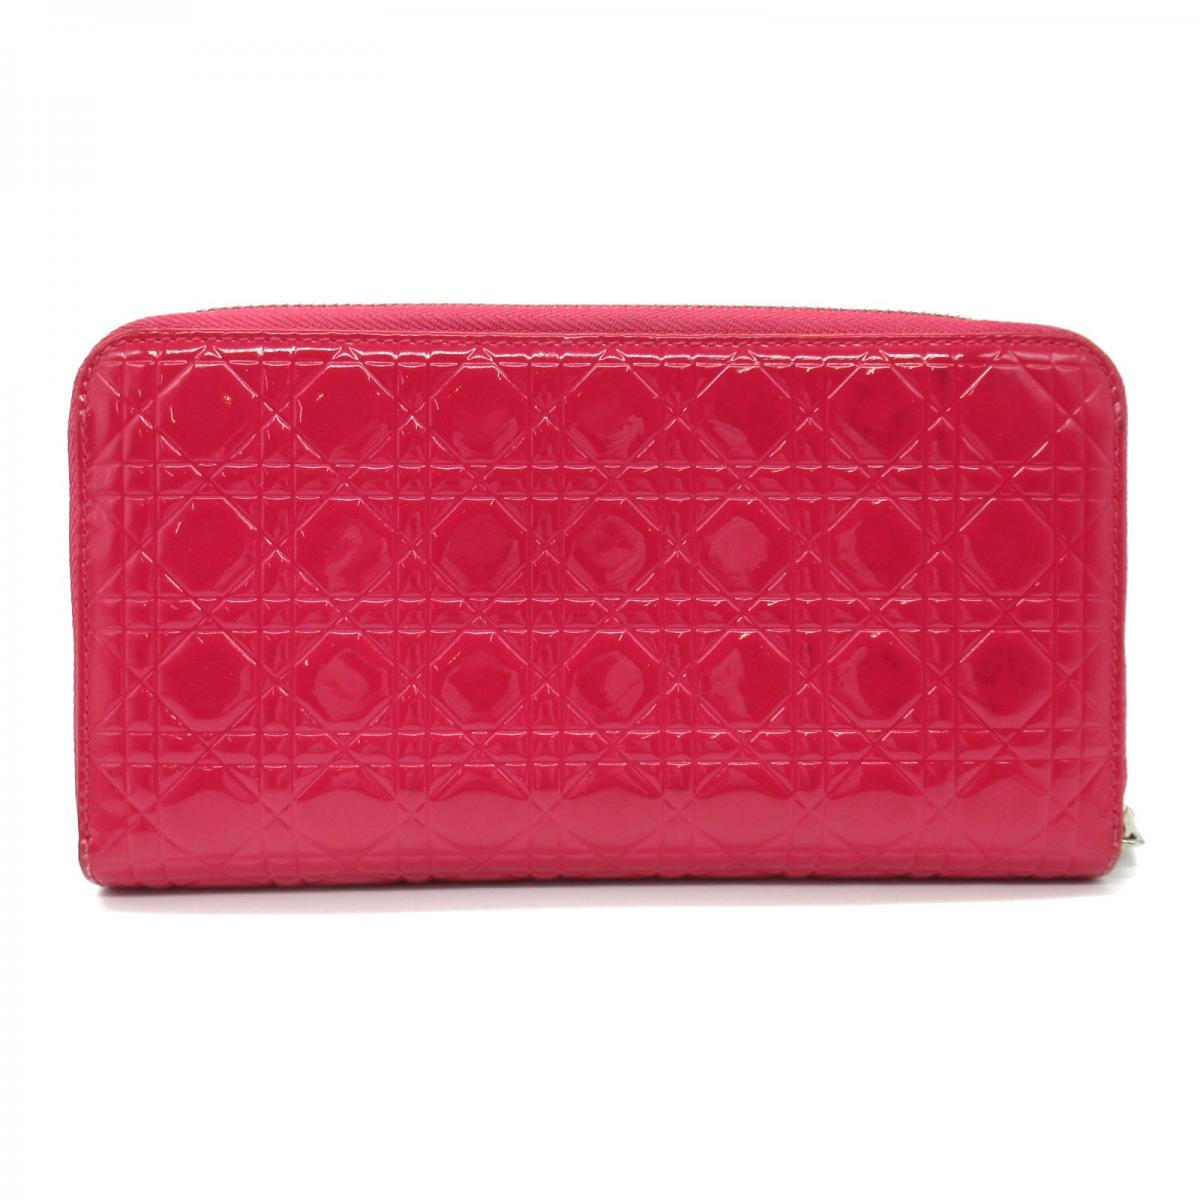 Cannage Patent Leather Continental Wallet